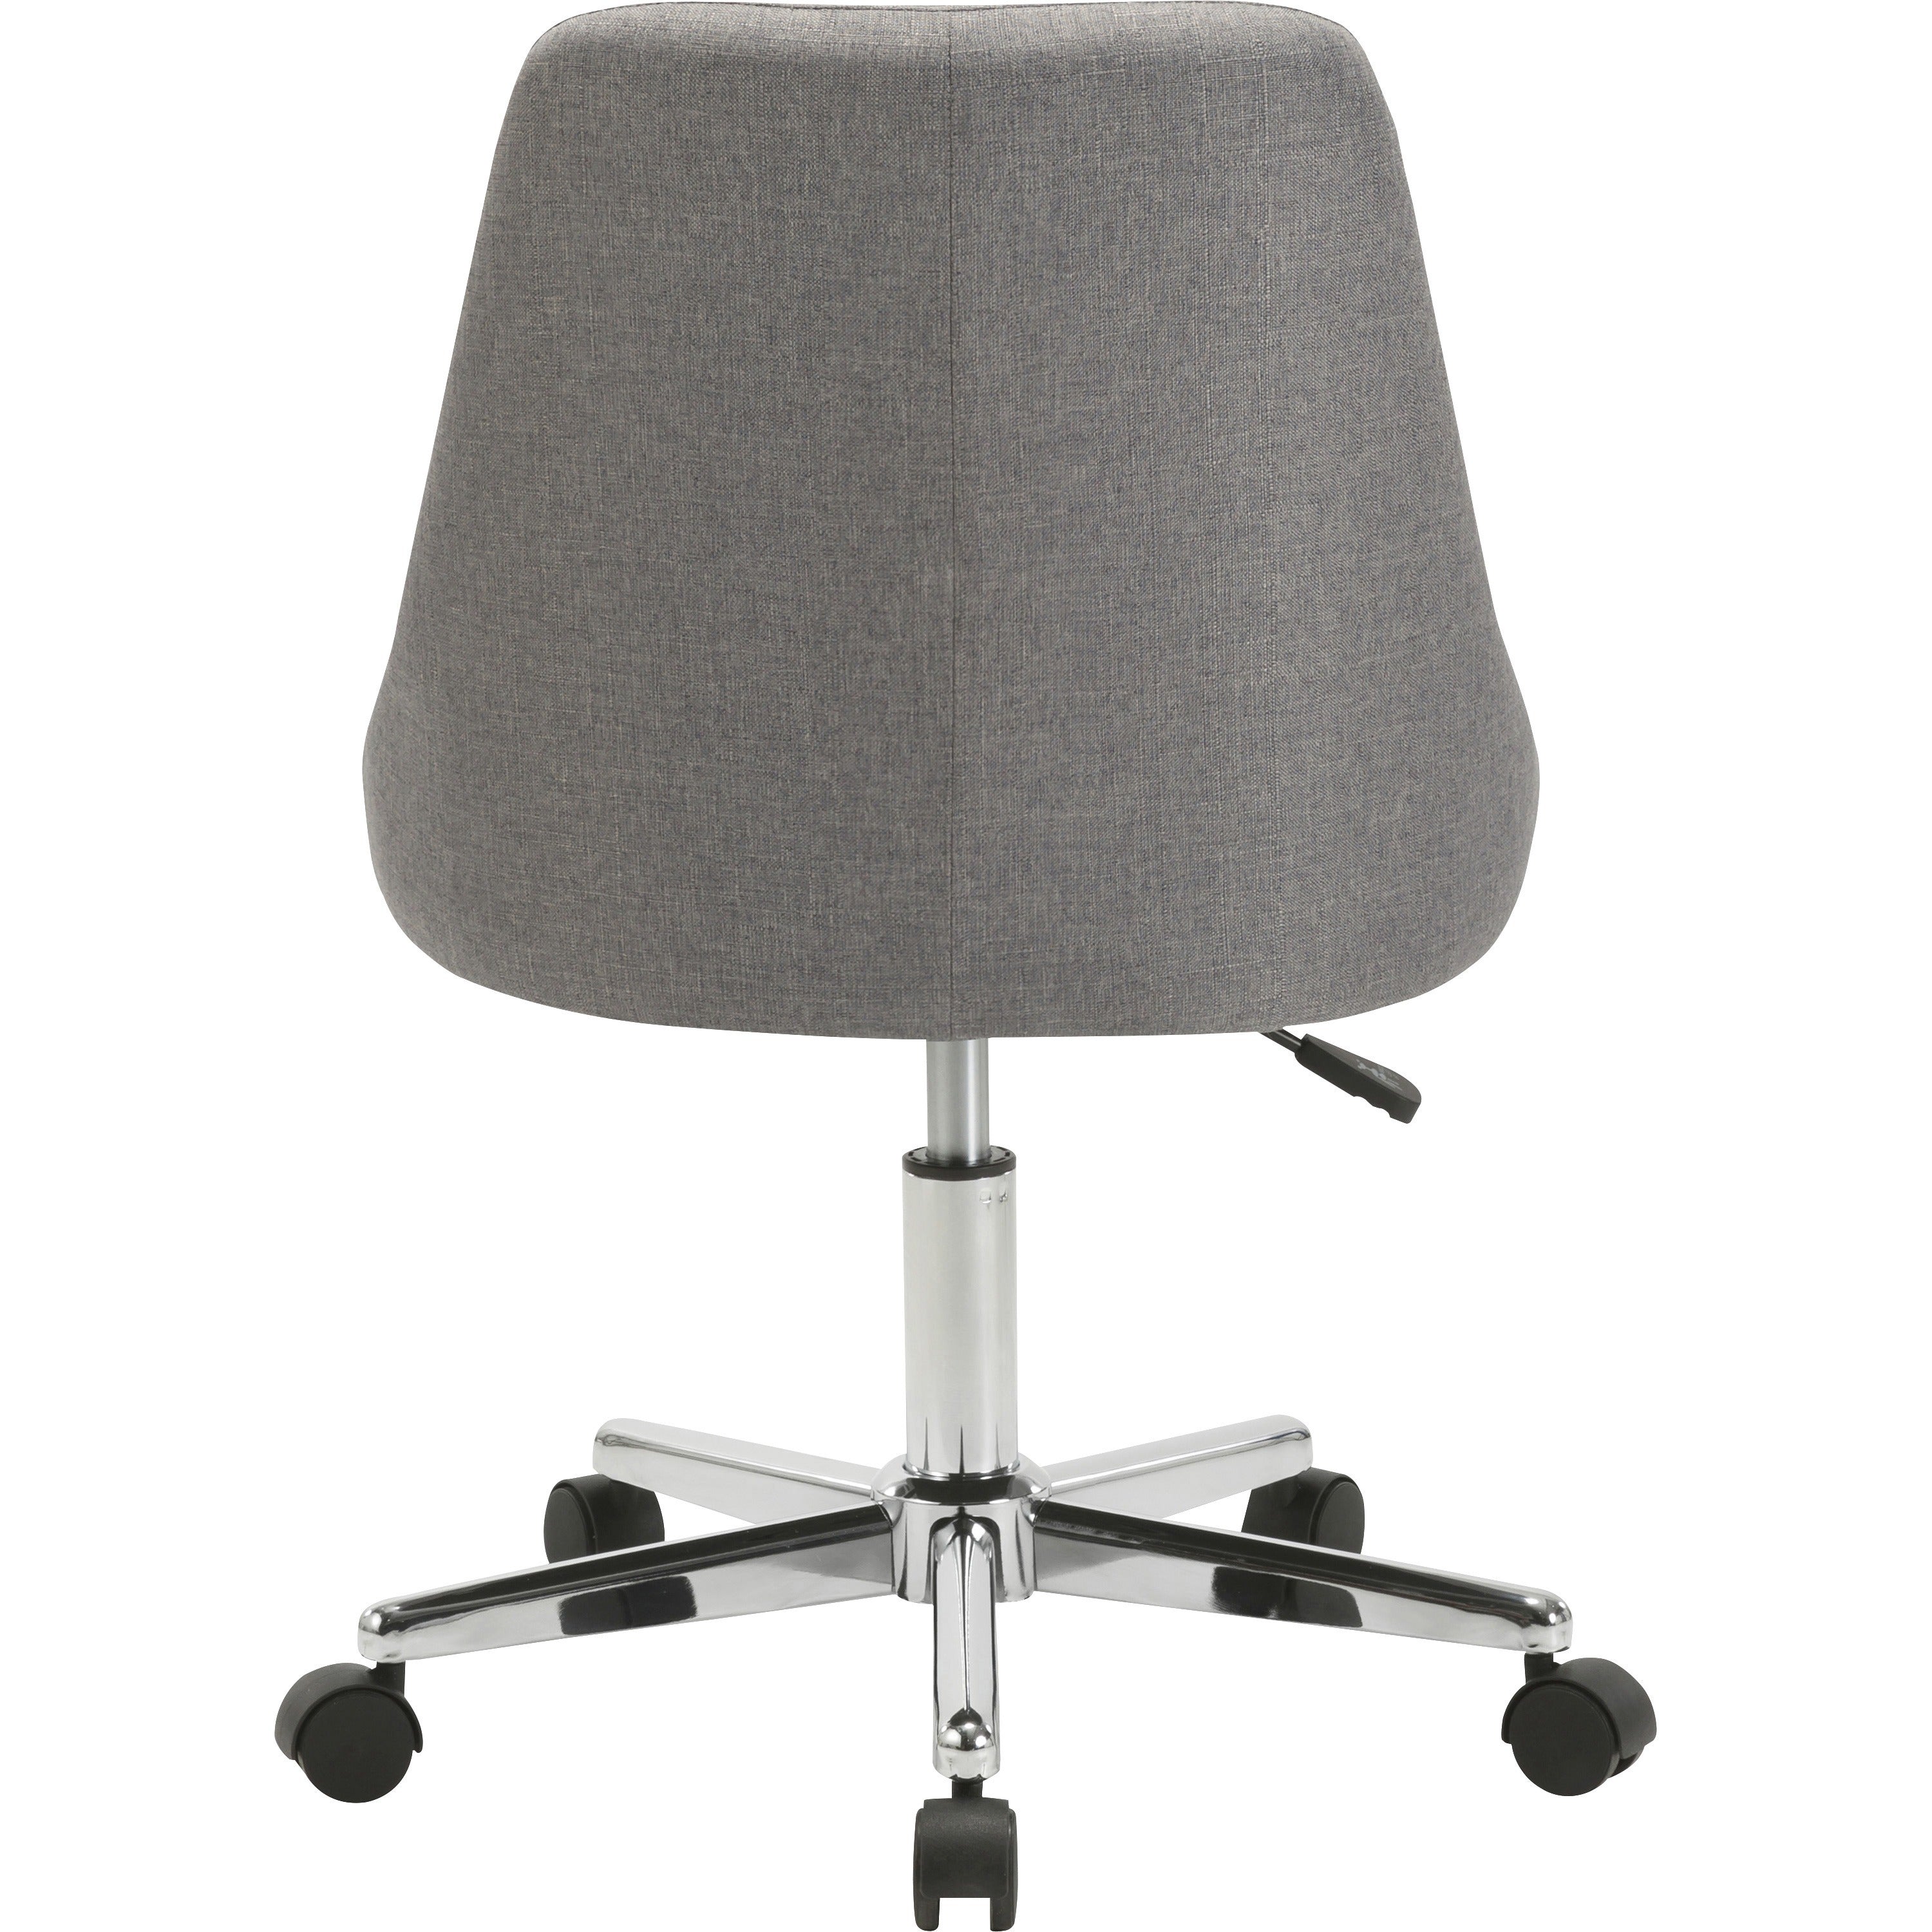 Lorell Resimercial Low-back Task Chair with Arms - 22.5" x 24.4"31.5" - Material: Fabric - Finish: Gray - 4